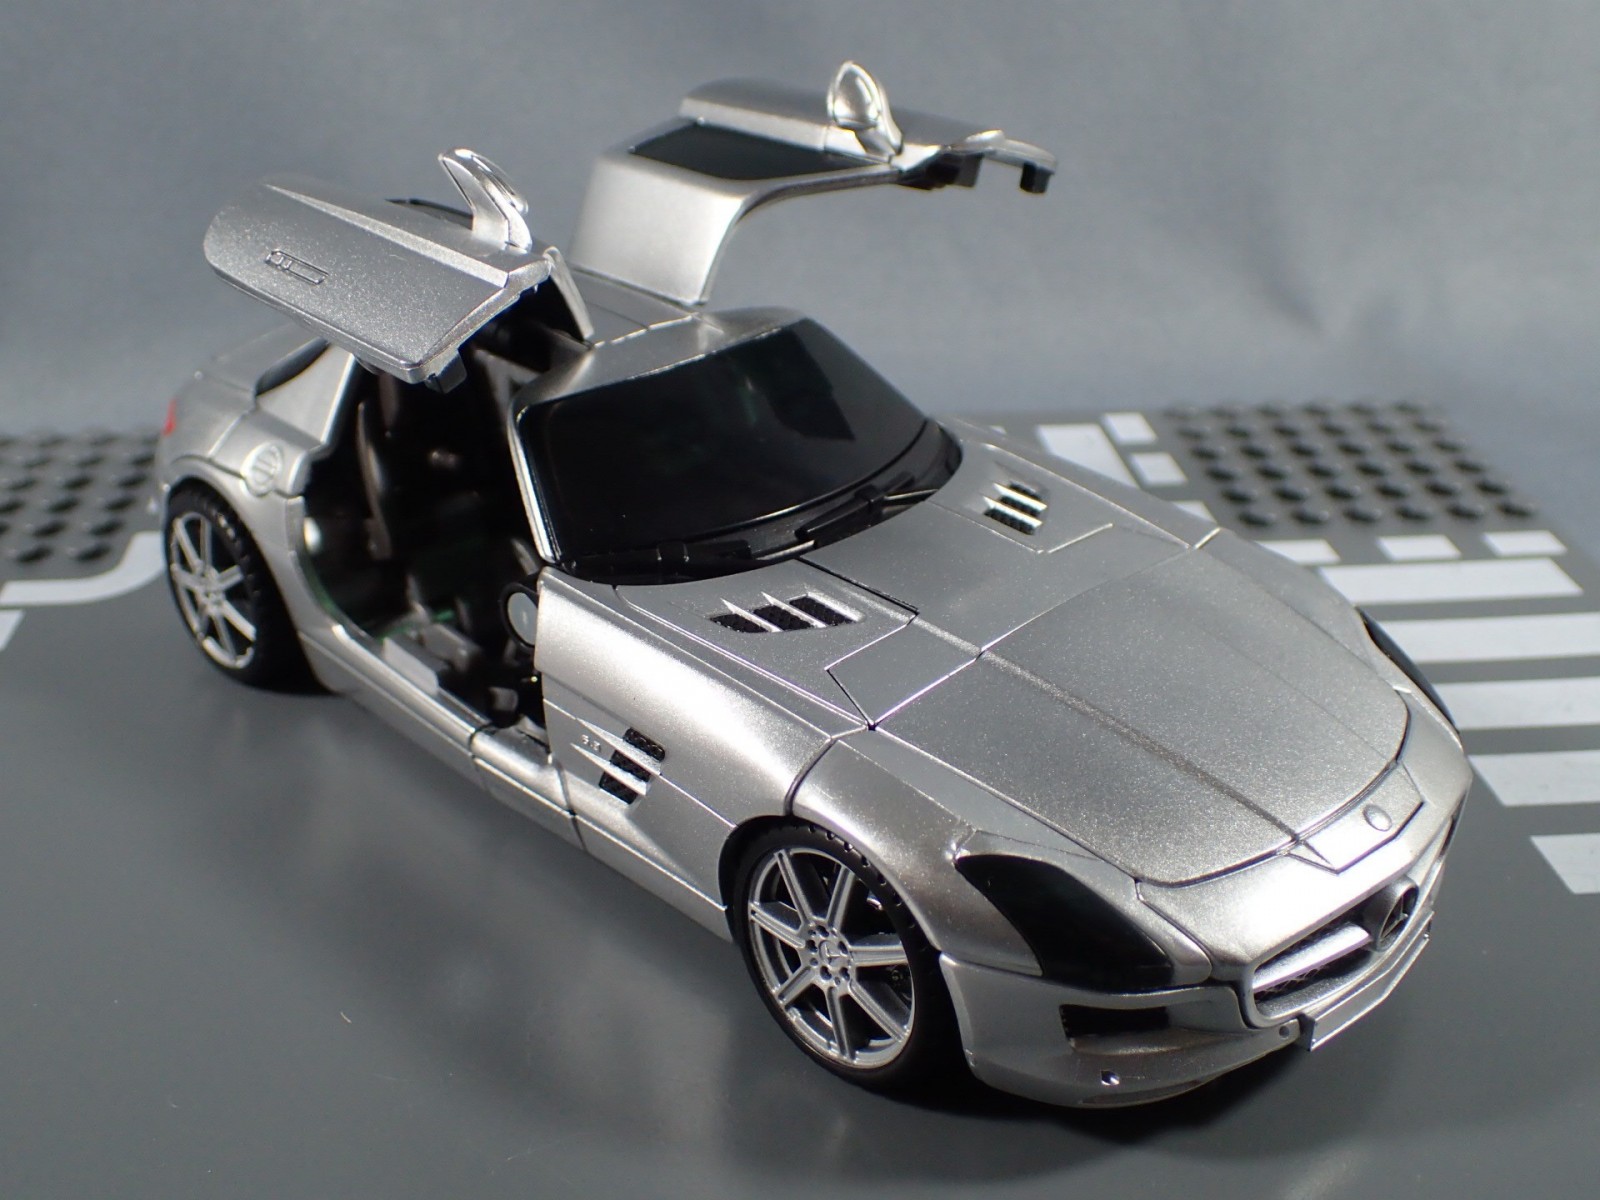 Transformers News: Top 5 Nicest Licensed Car Modes Among Transformers Toys